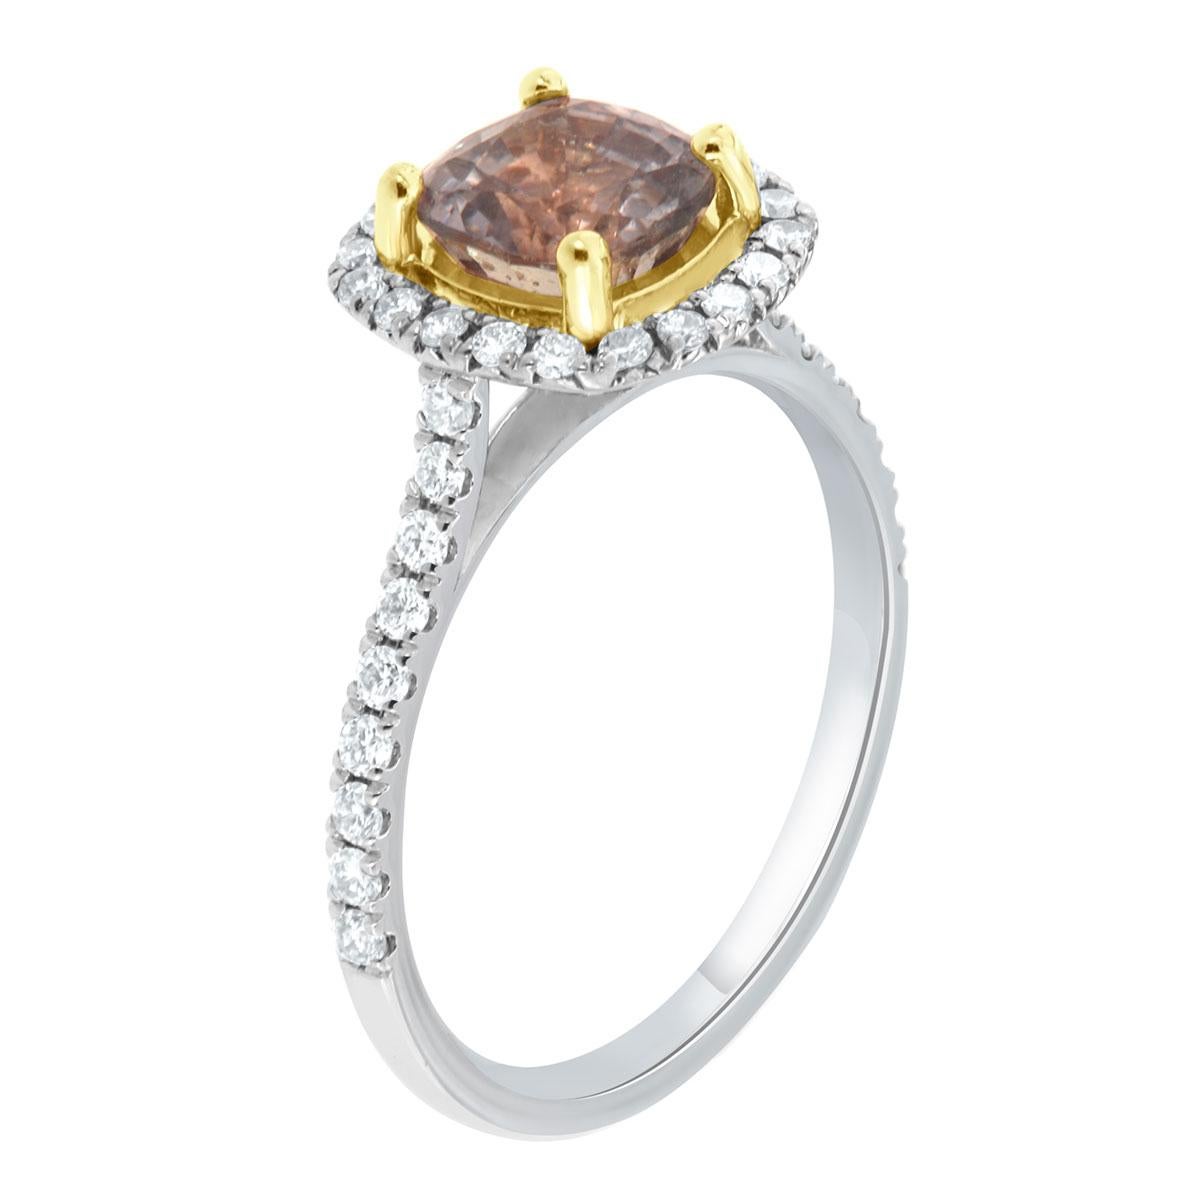 This 18K gold halo ring features perfectly matched brilliant round diamonds 1.5 mm each Micro-Prong set on a 1.8 mm wide shank. In the center of the ring is set one unique natural Sri Lankan No Heat Light Purple Sapphire in an 18k Yellow gold cup.